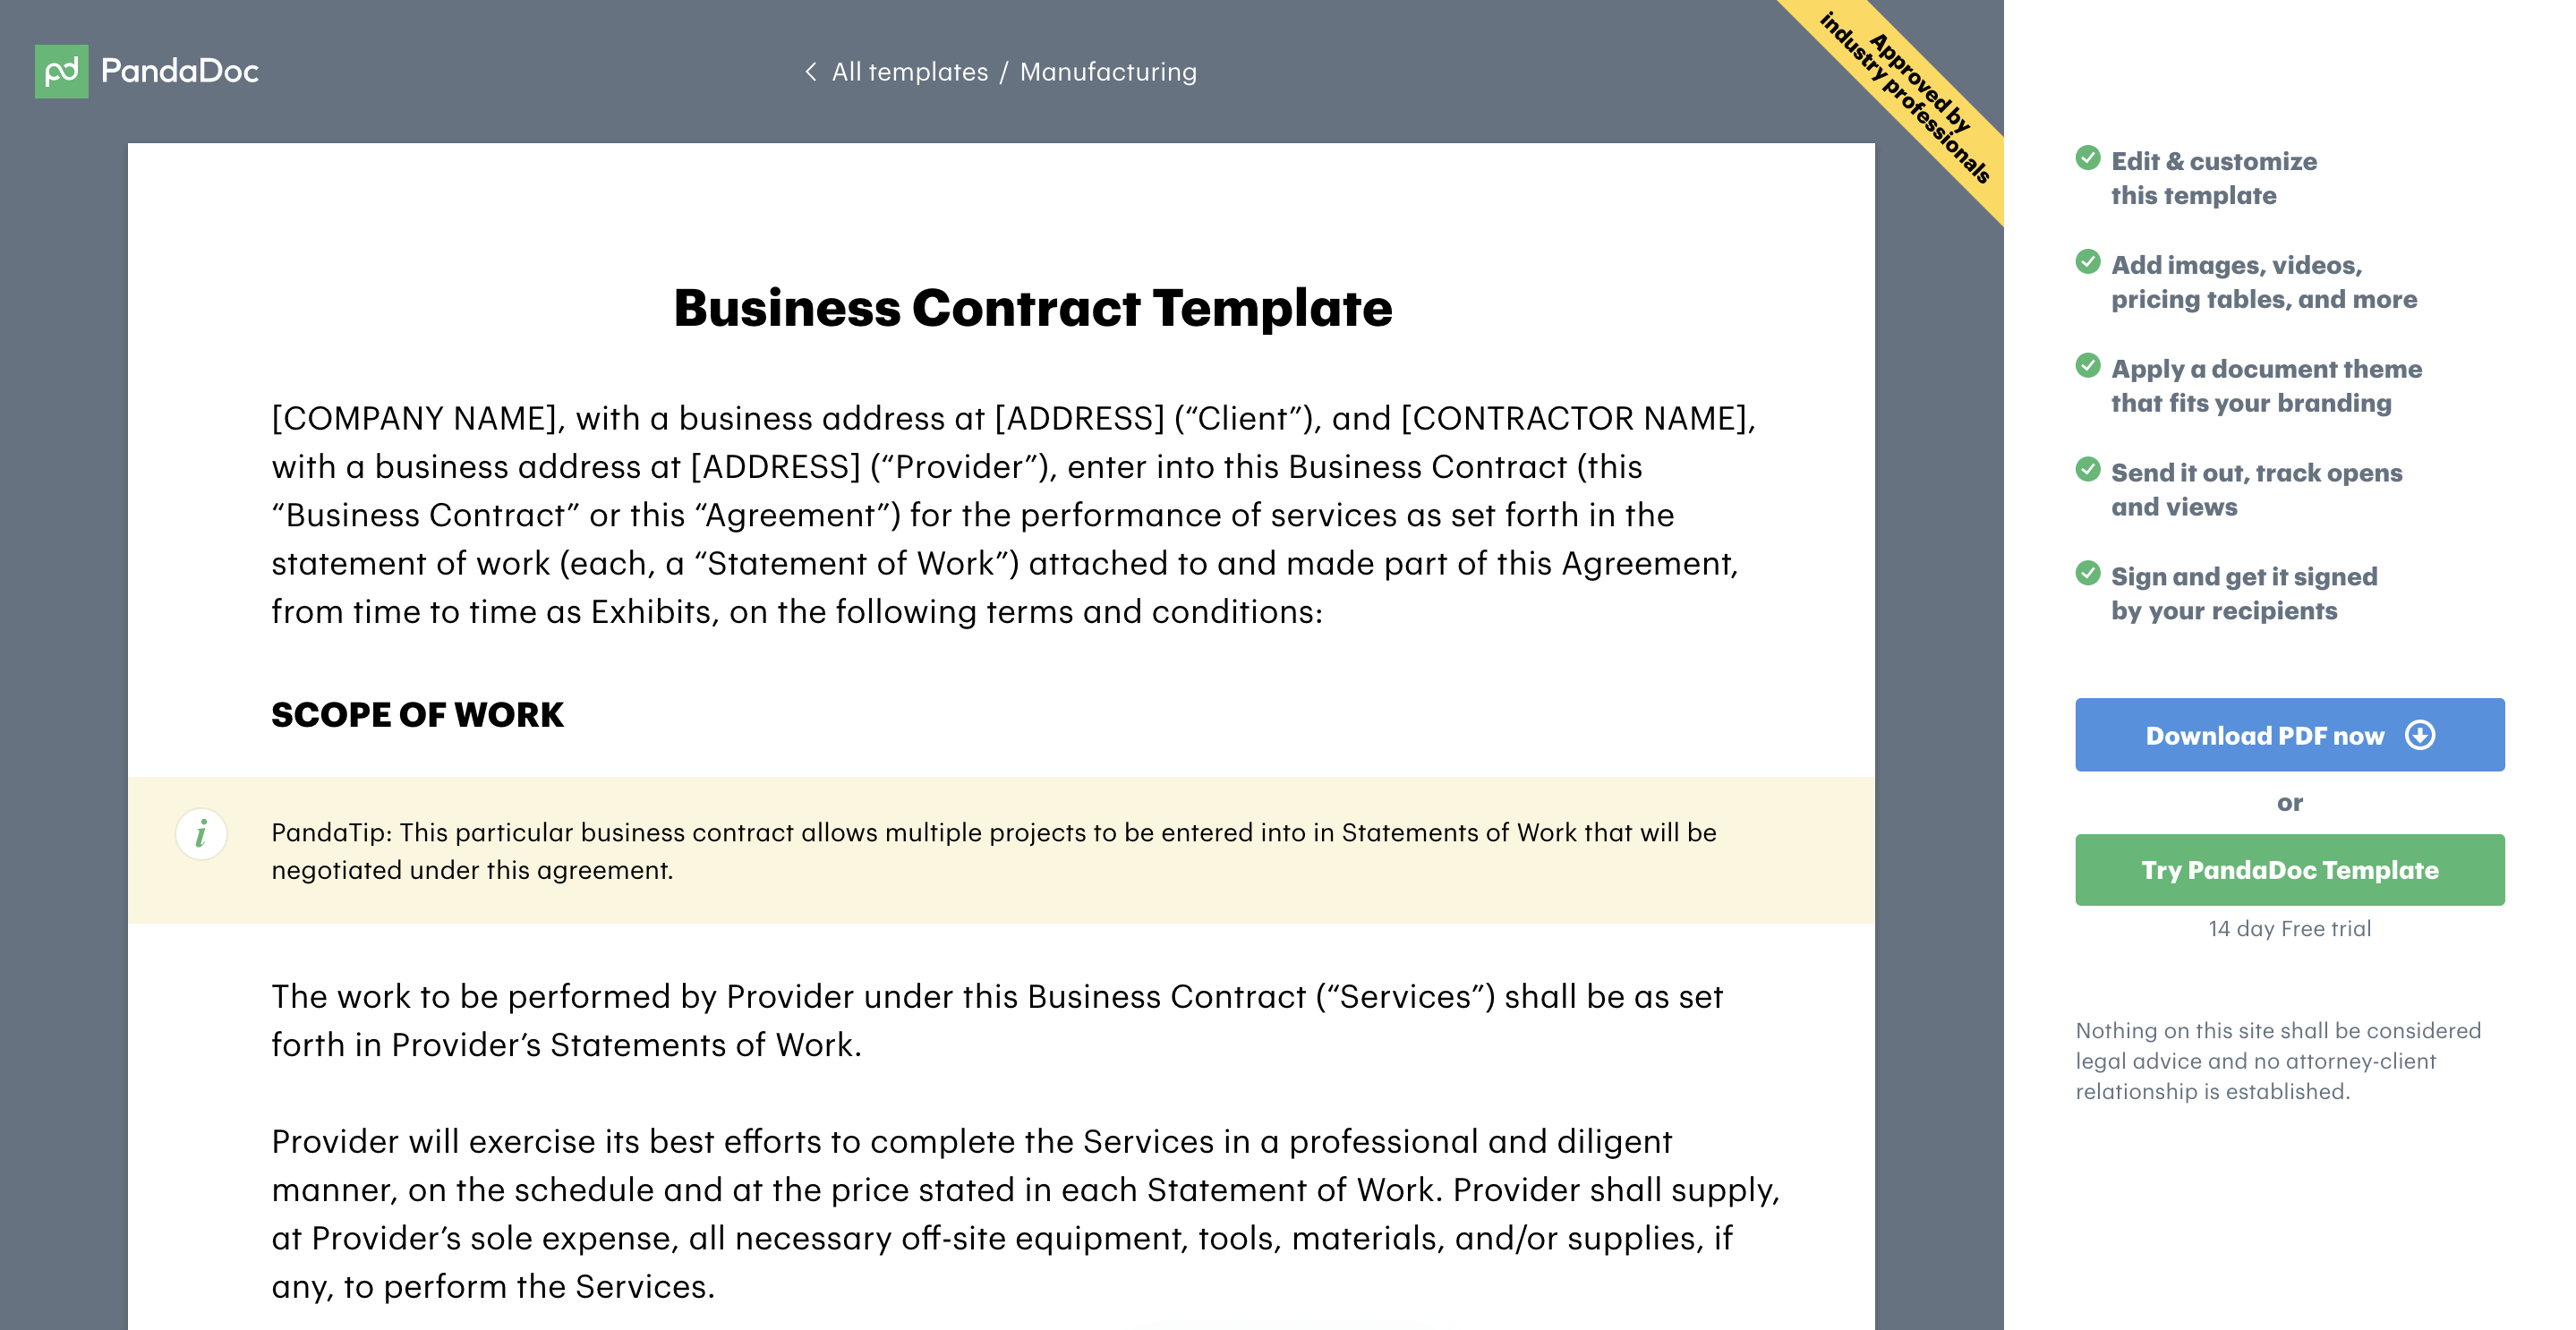 Business Contract Agreement How To Sign A Business Contract Via Pandadoc